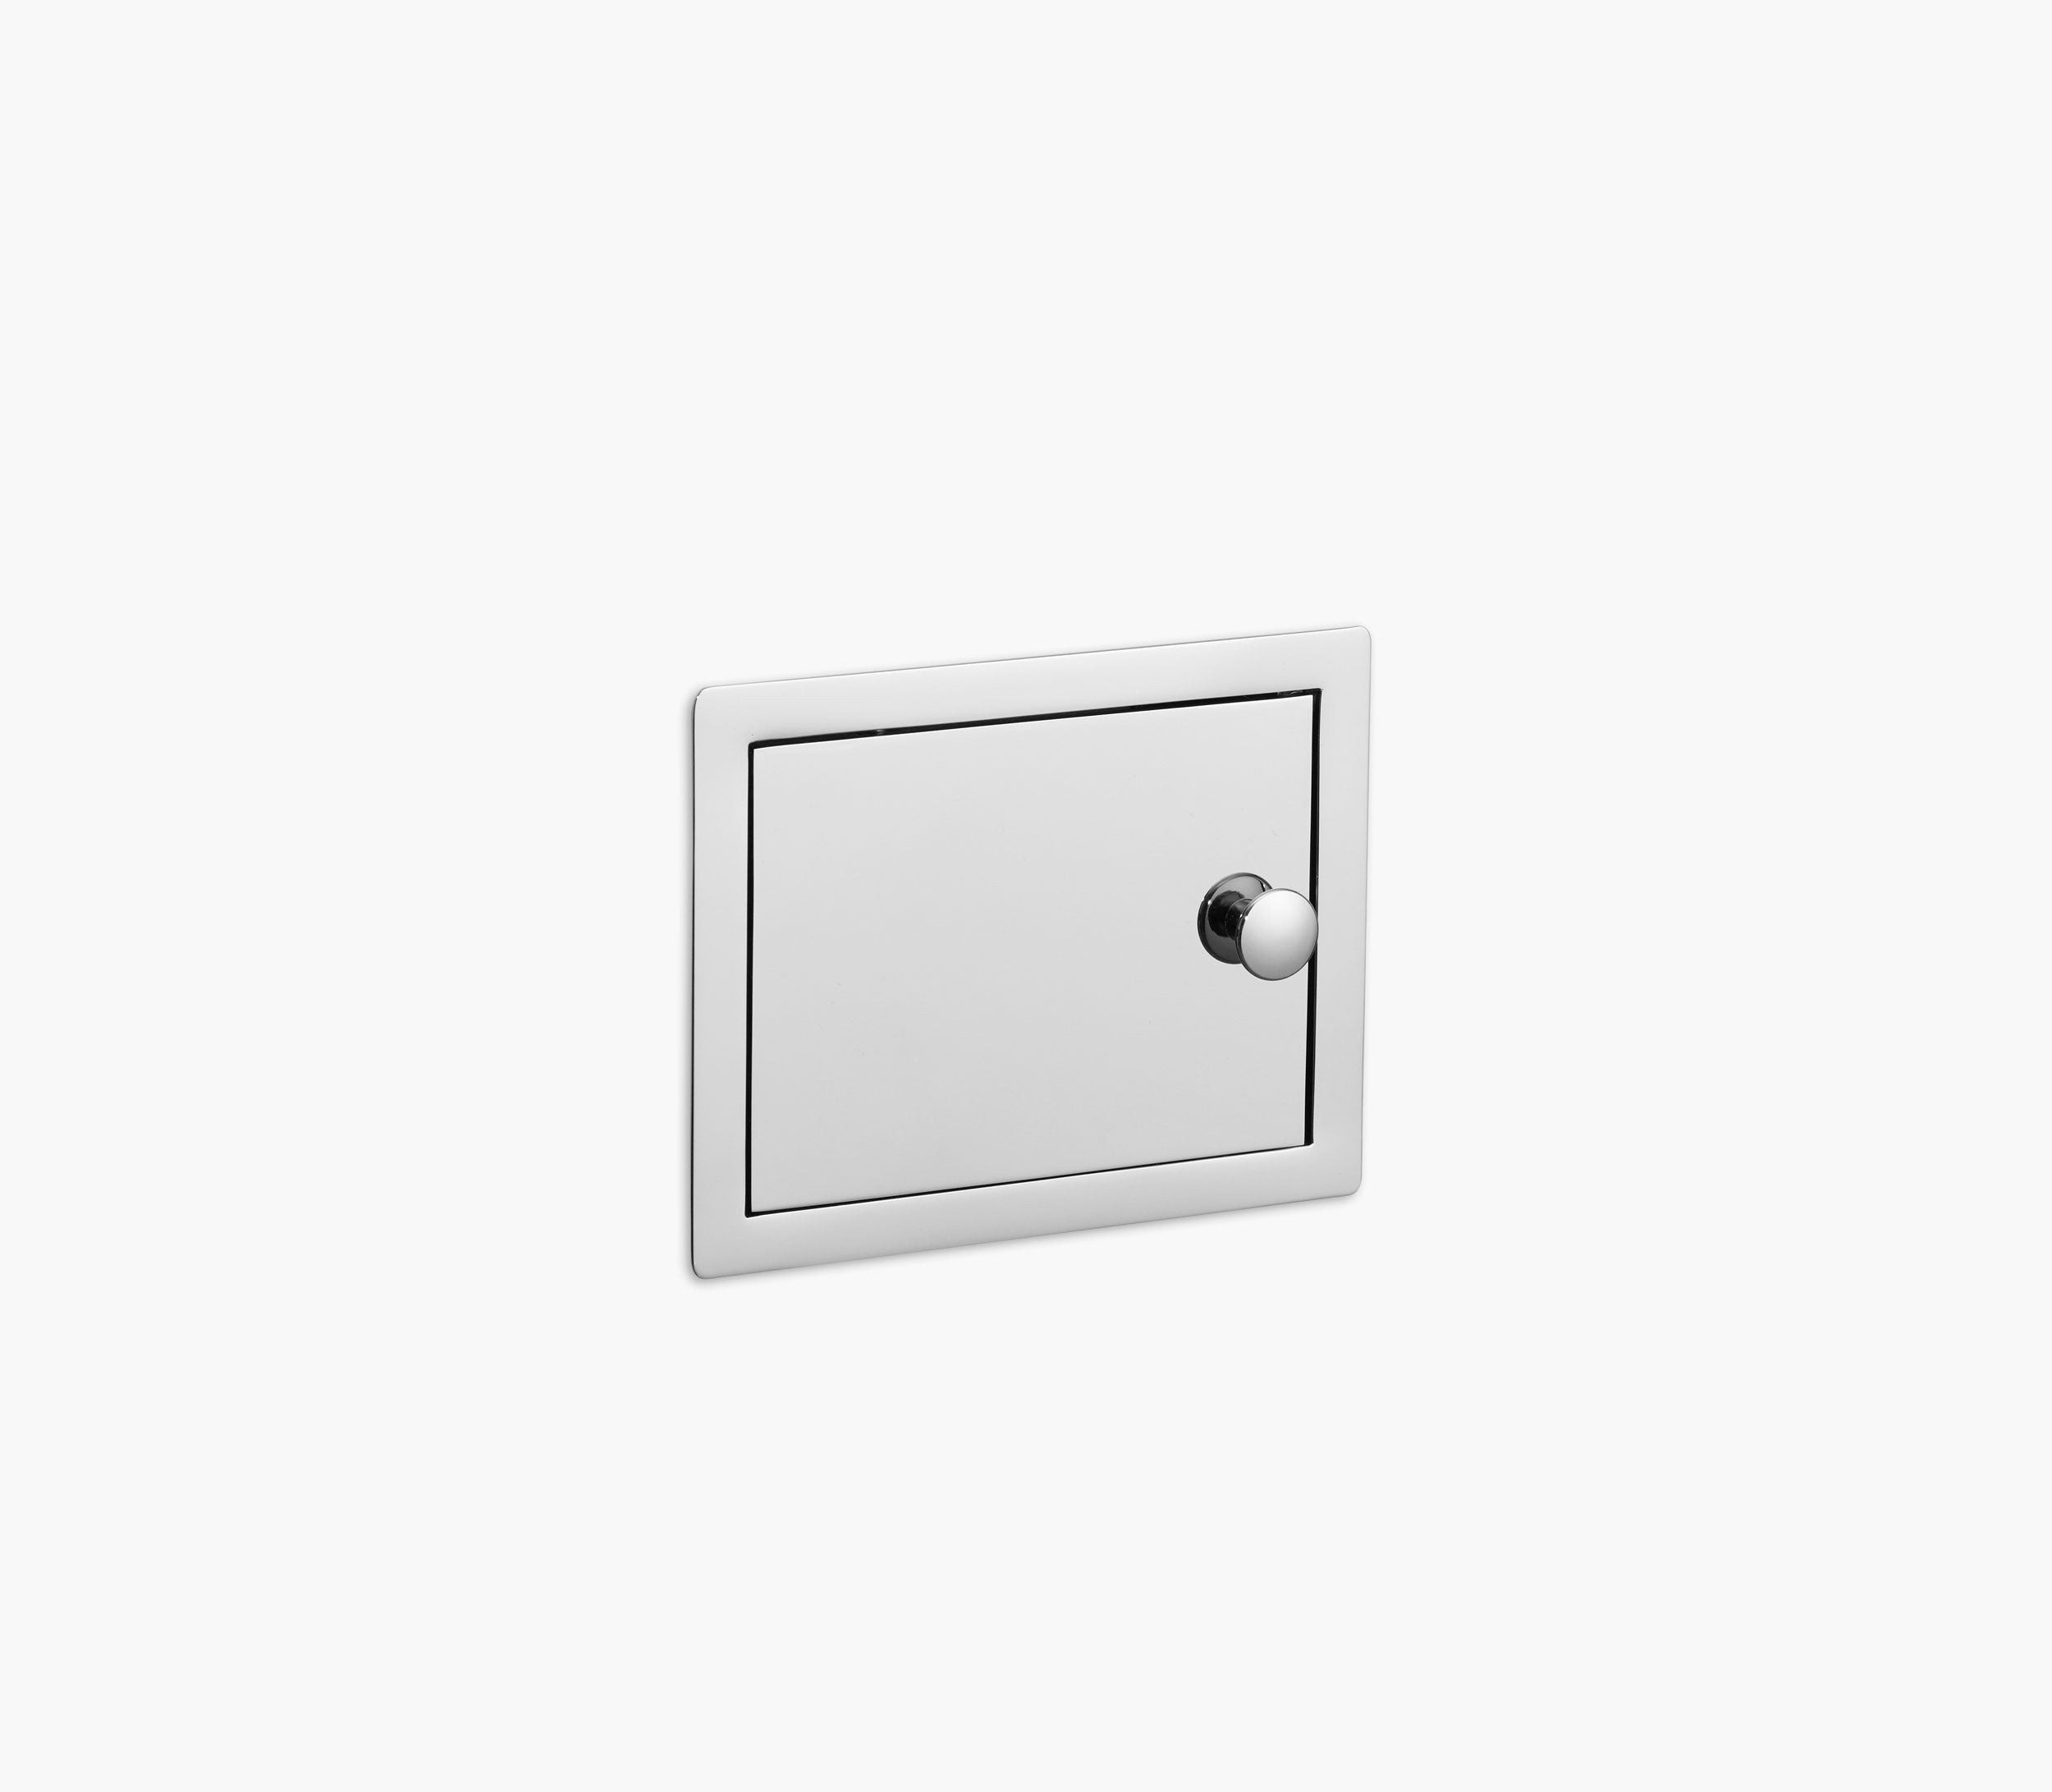 Wall Recessed Toilet Paper Holder II Open Right Product Image 1